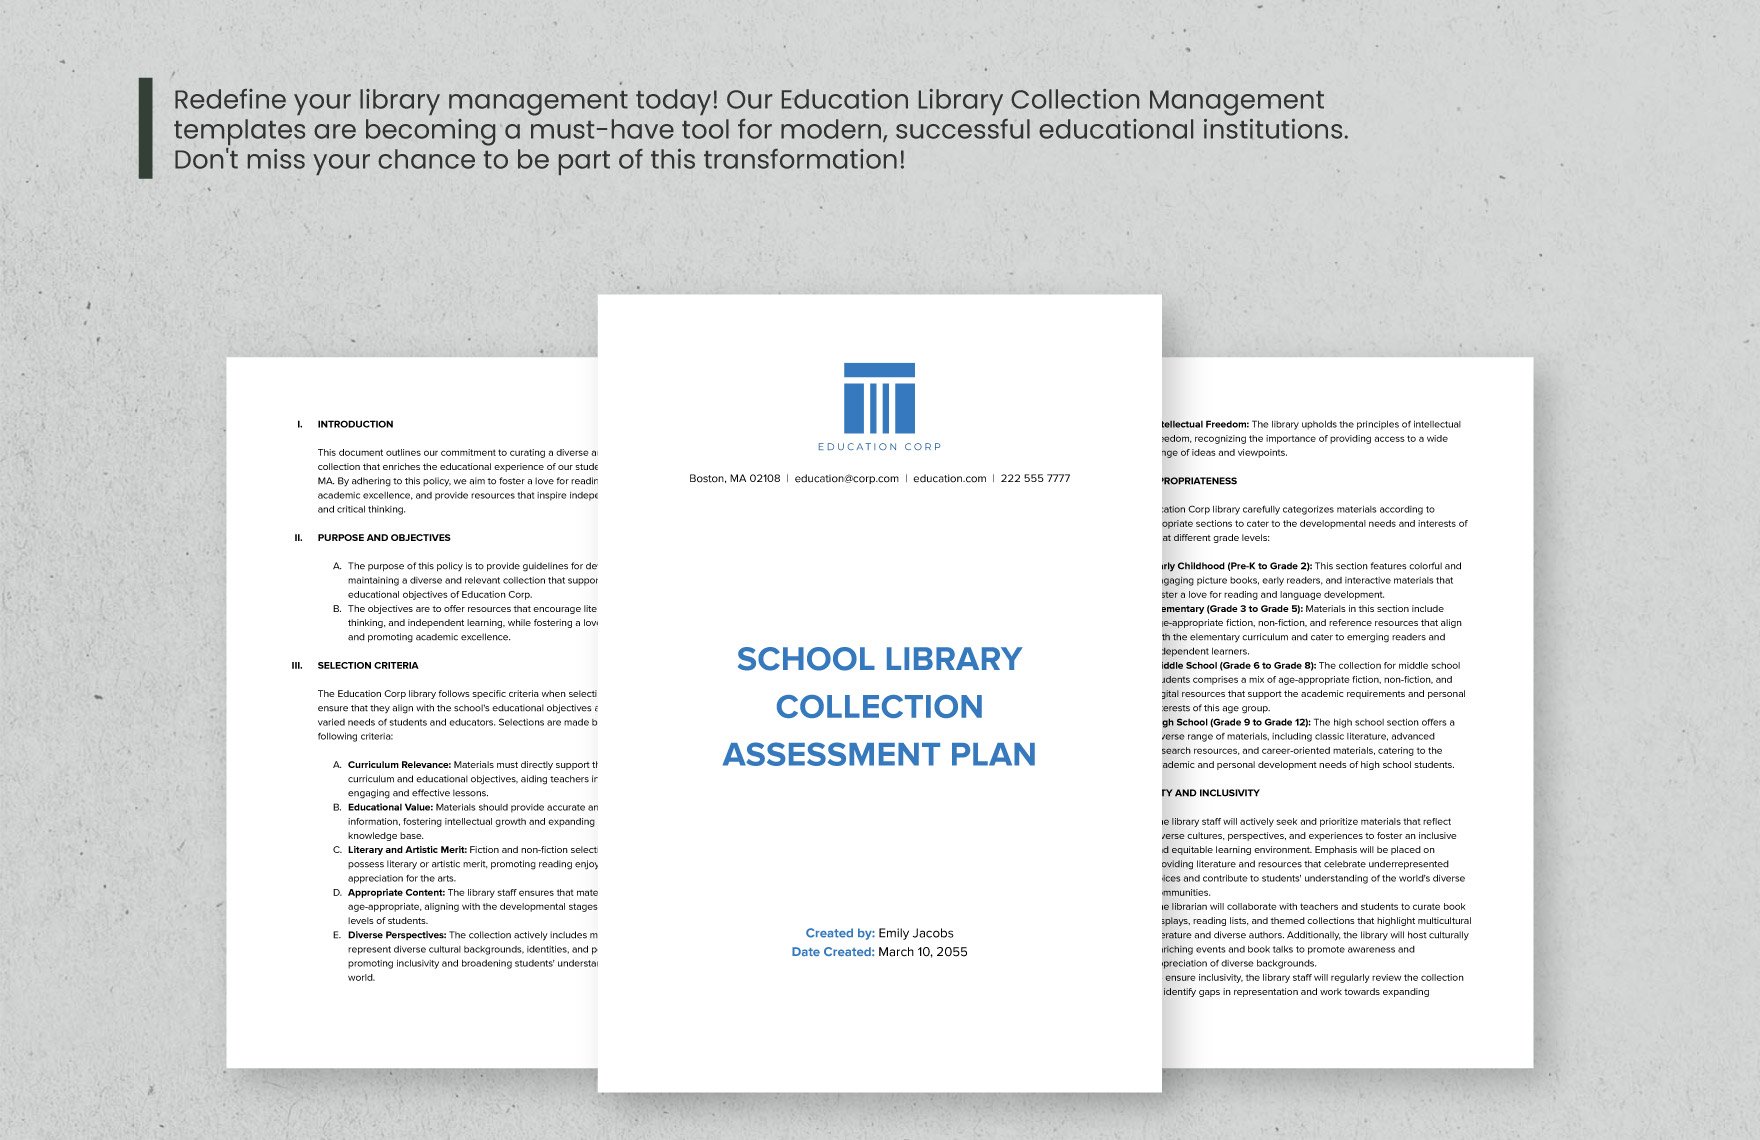 School Library Collection Assessment Plan Template